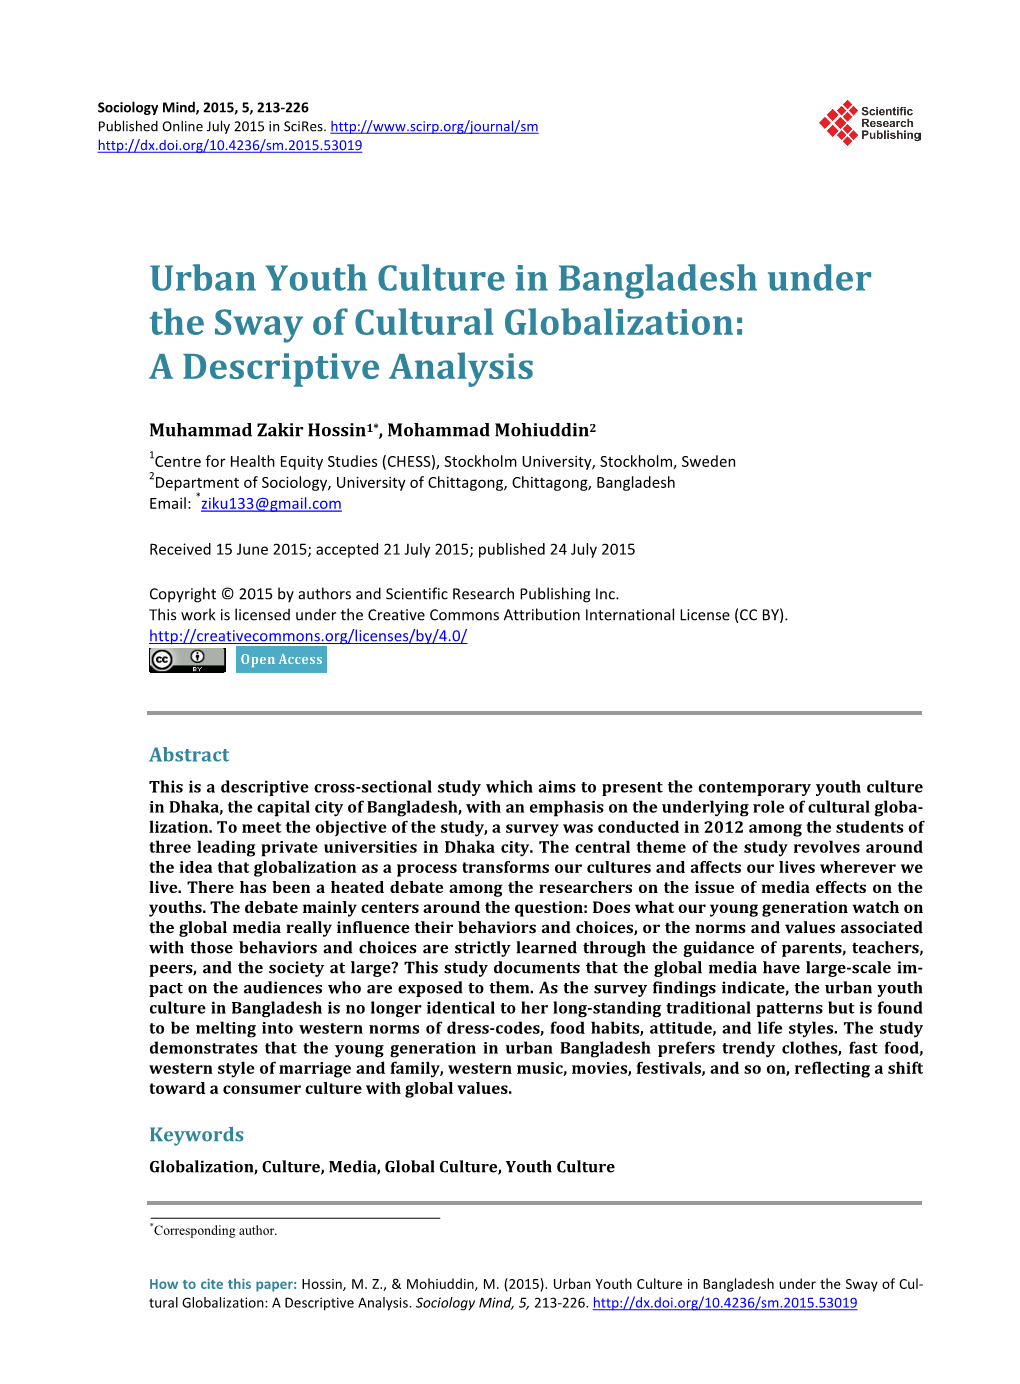 Urban Youth Culture in Bangladesh Under the Sway of Cultural Globalization: a Descriptive Analysis